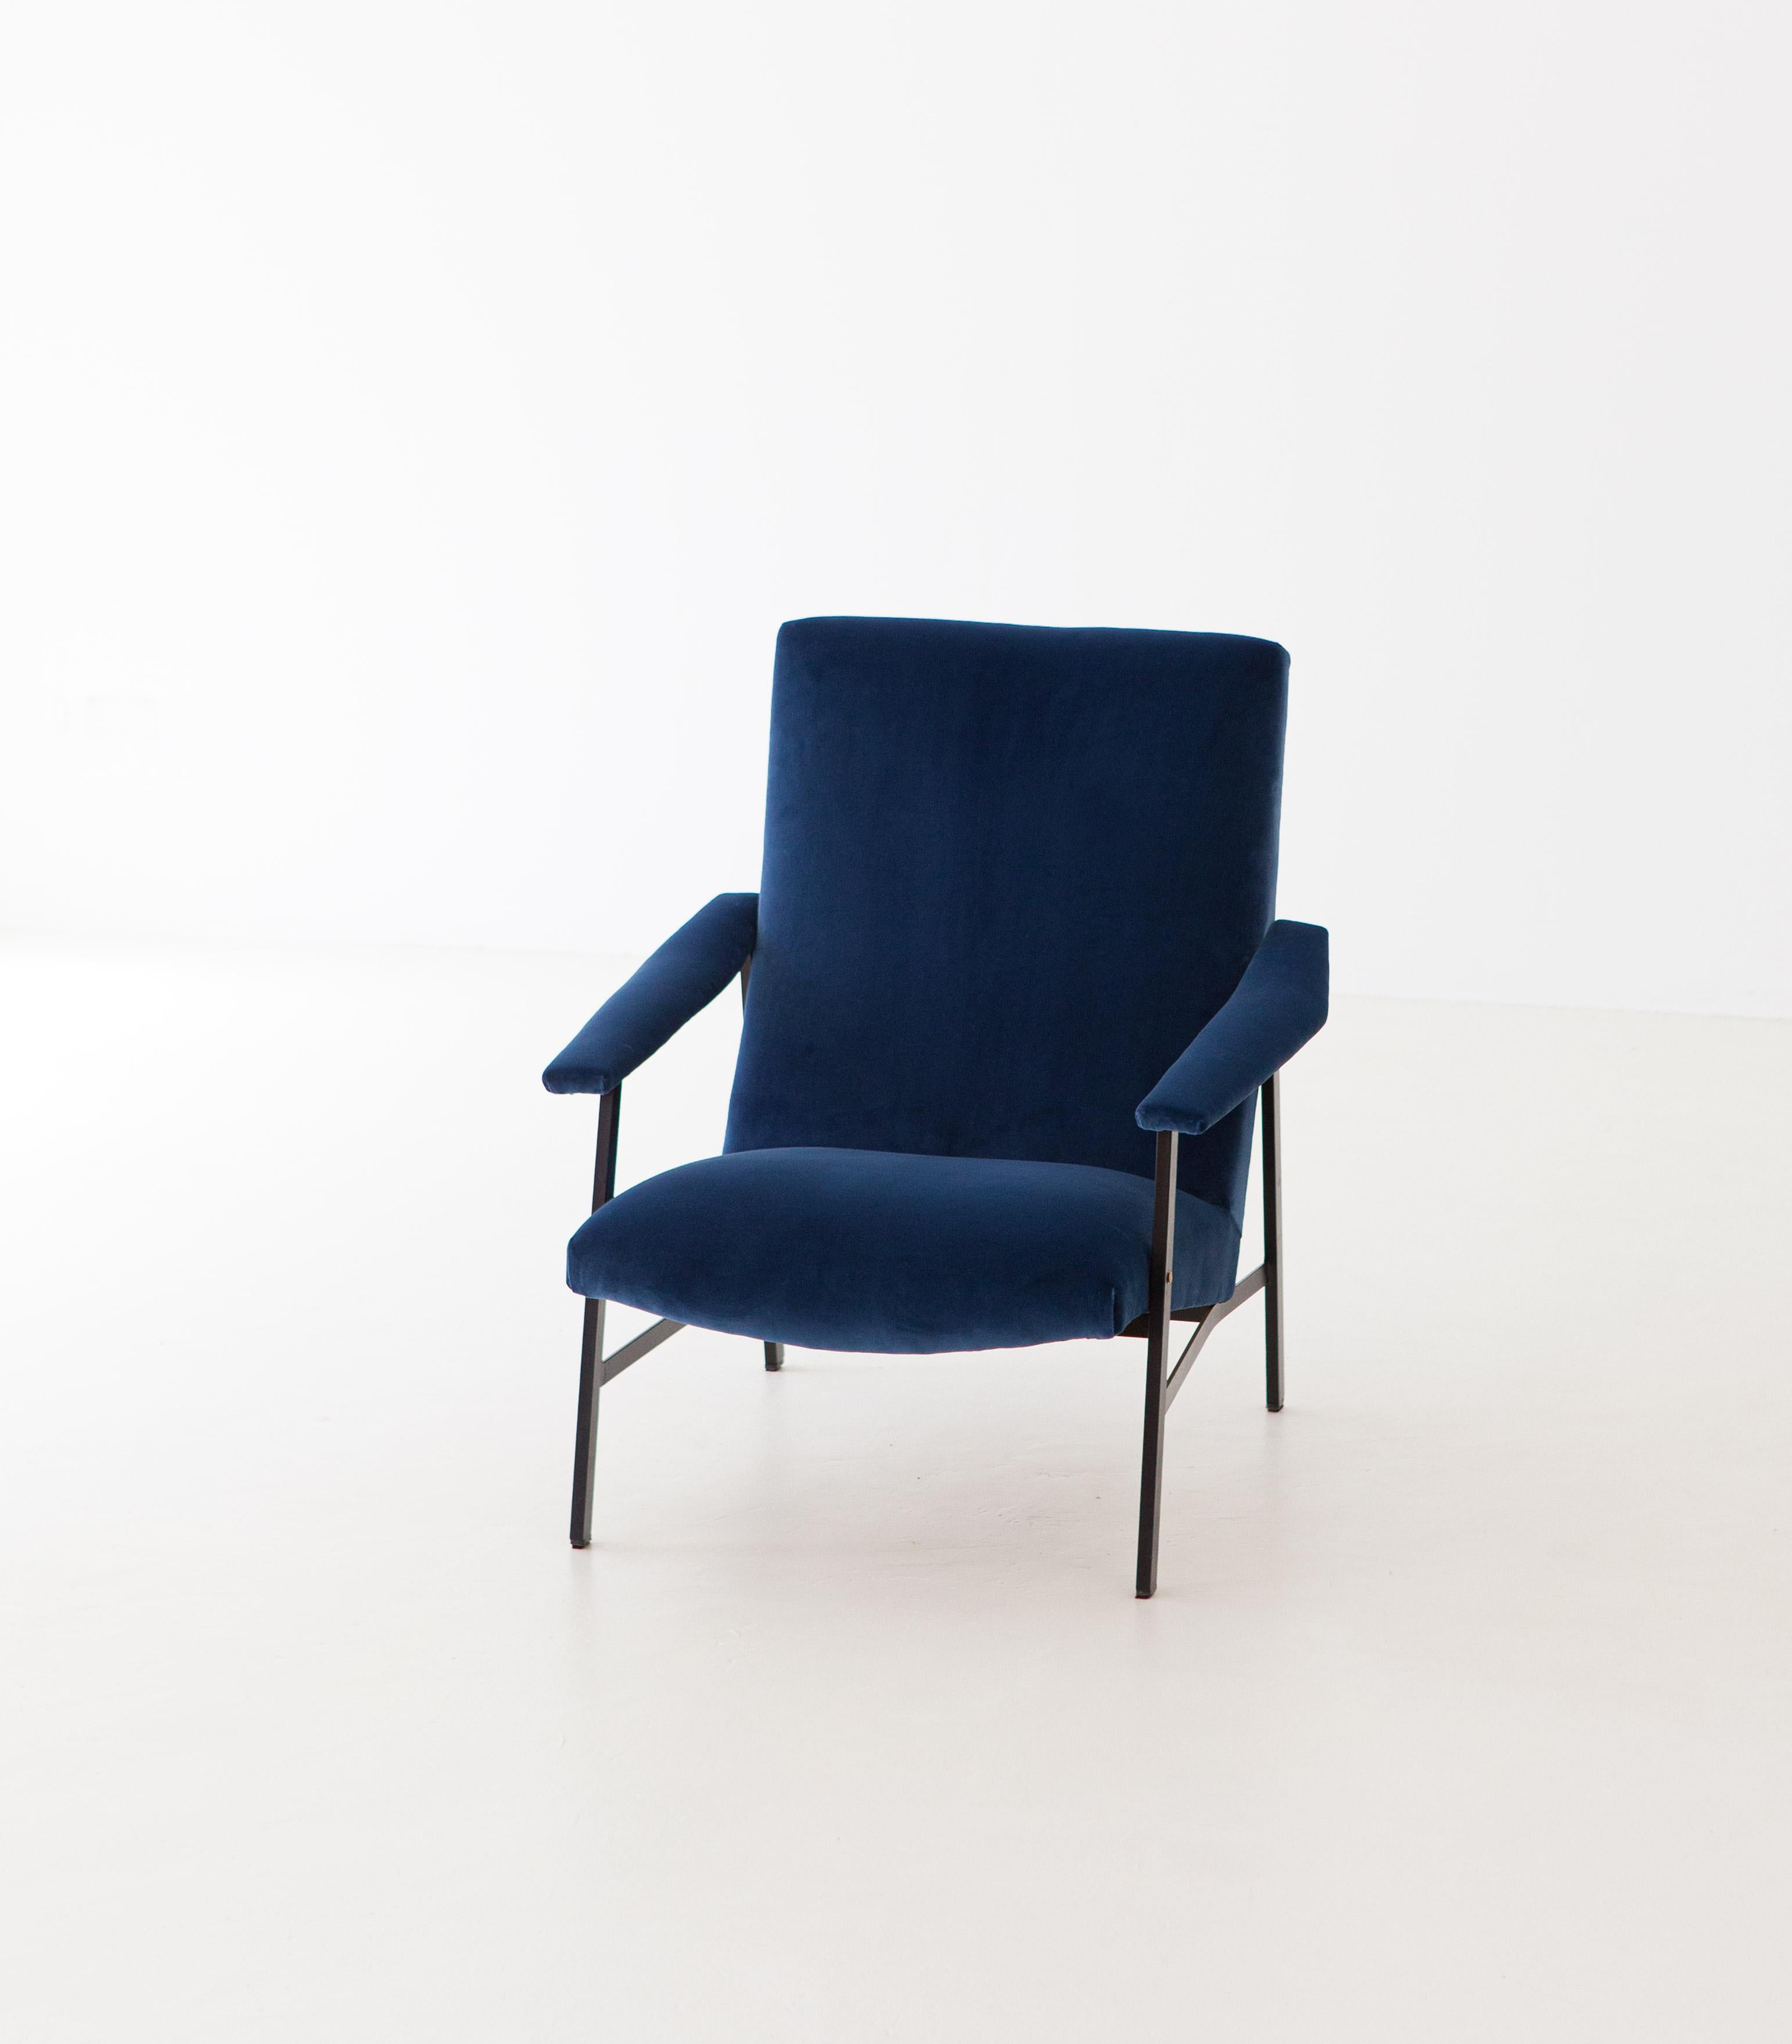 A Mid-Century Modern lounge chair with armrests manufactured in Italy during the 1950s

Completely renoved with new black enamel on the iron frame and new blue cotton velvet upholstery , also the padding is new

Minimal but at the same time